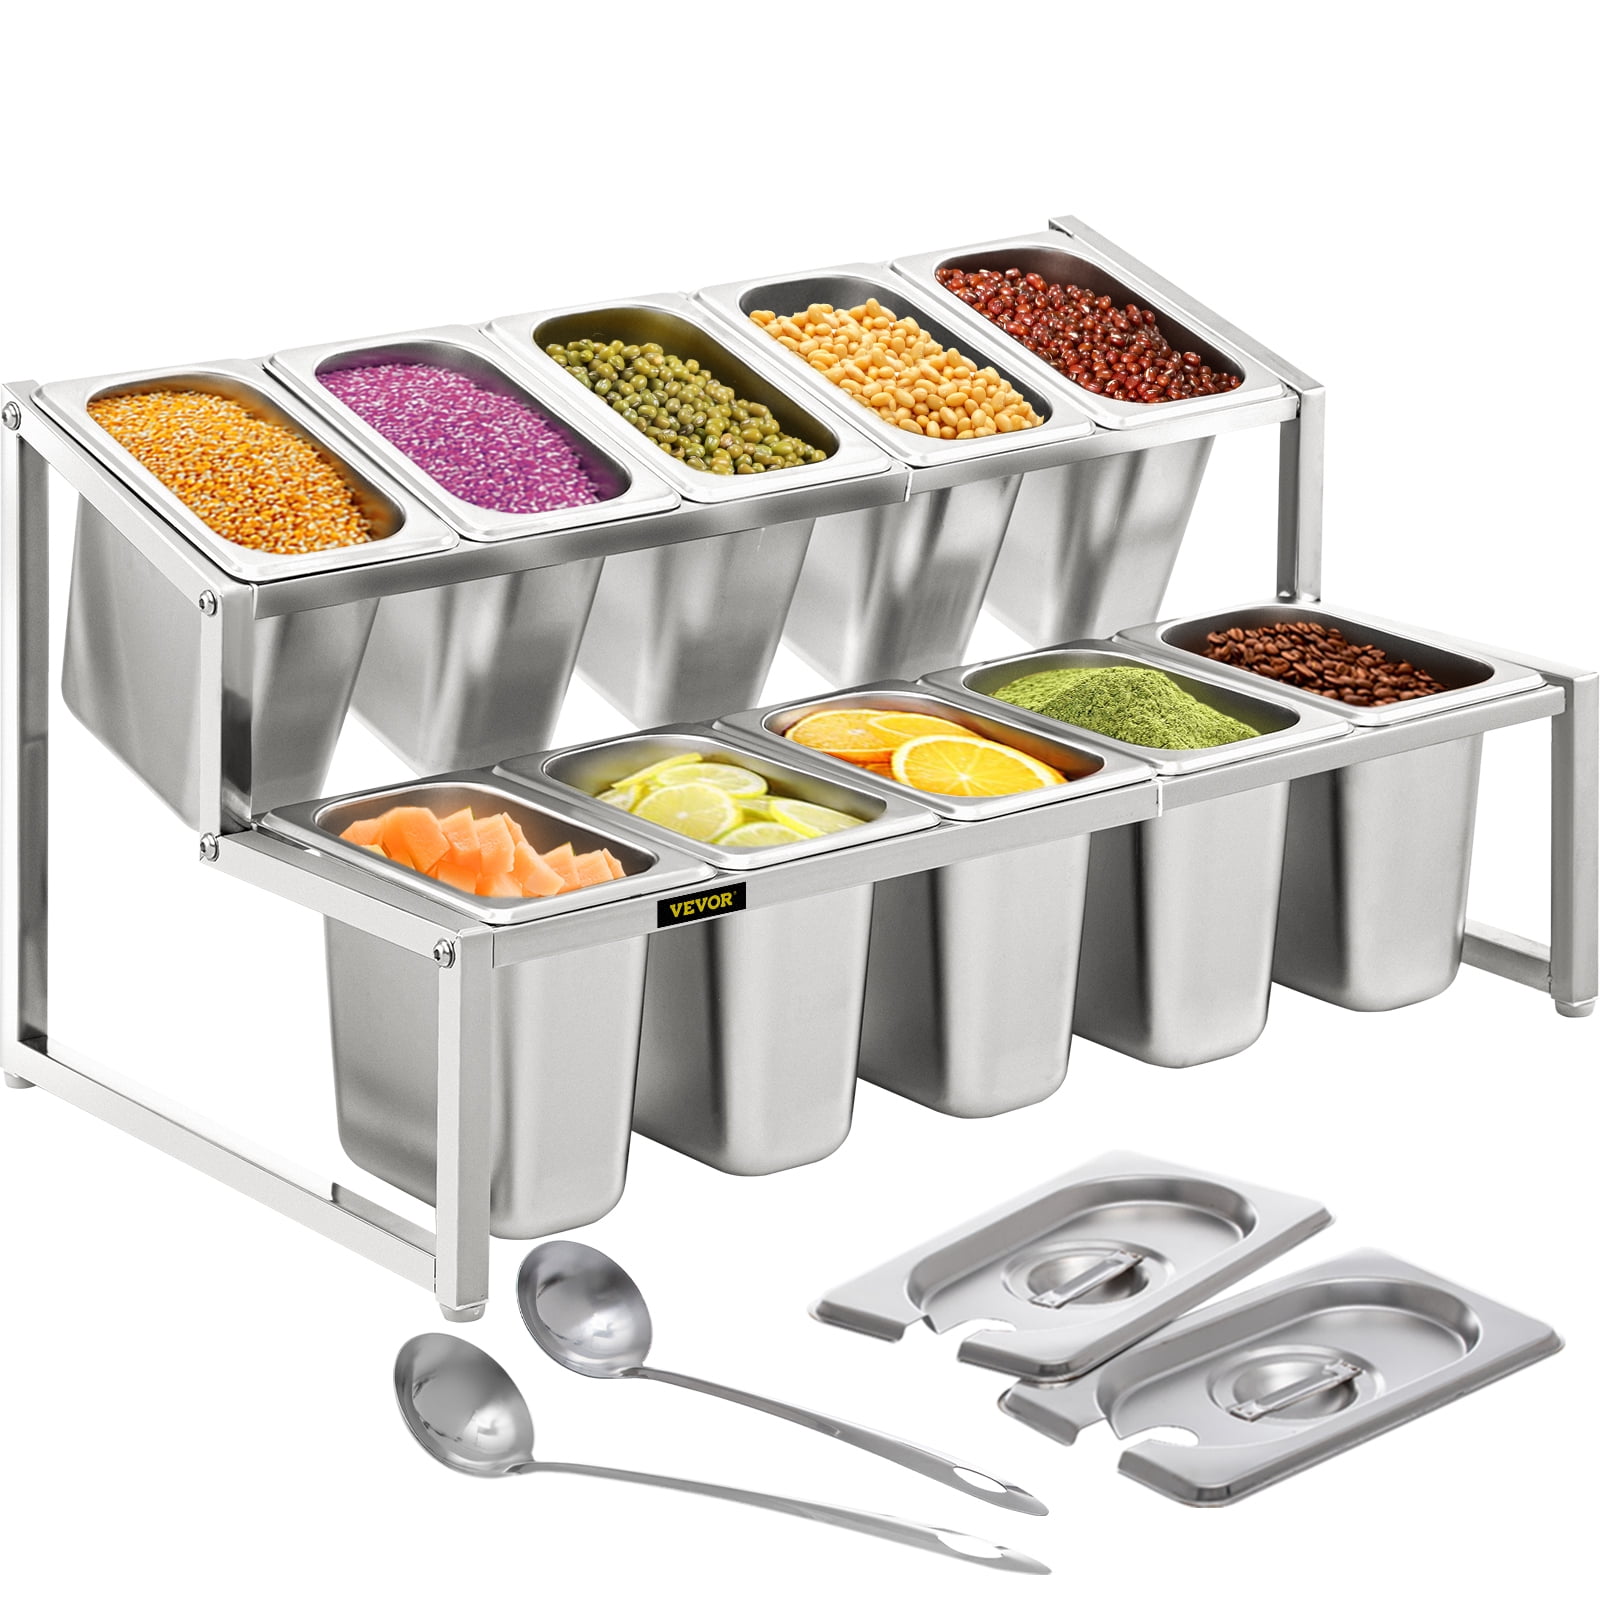 Inclined Spice Rack Organizer